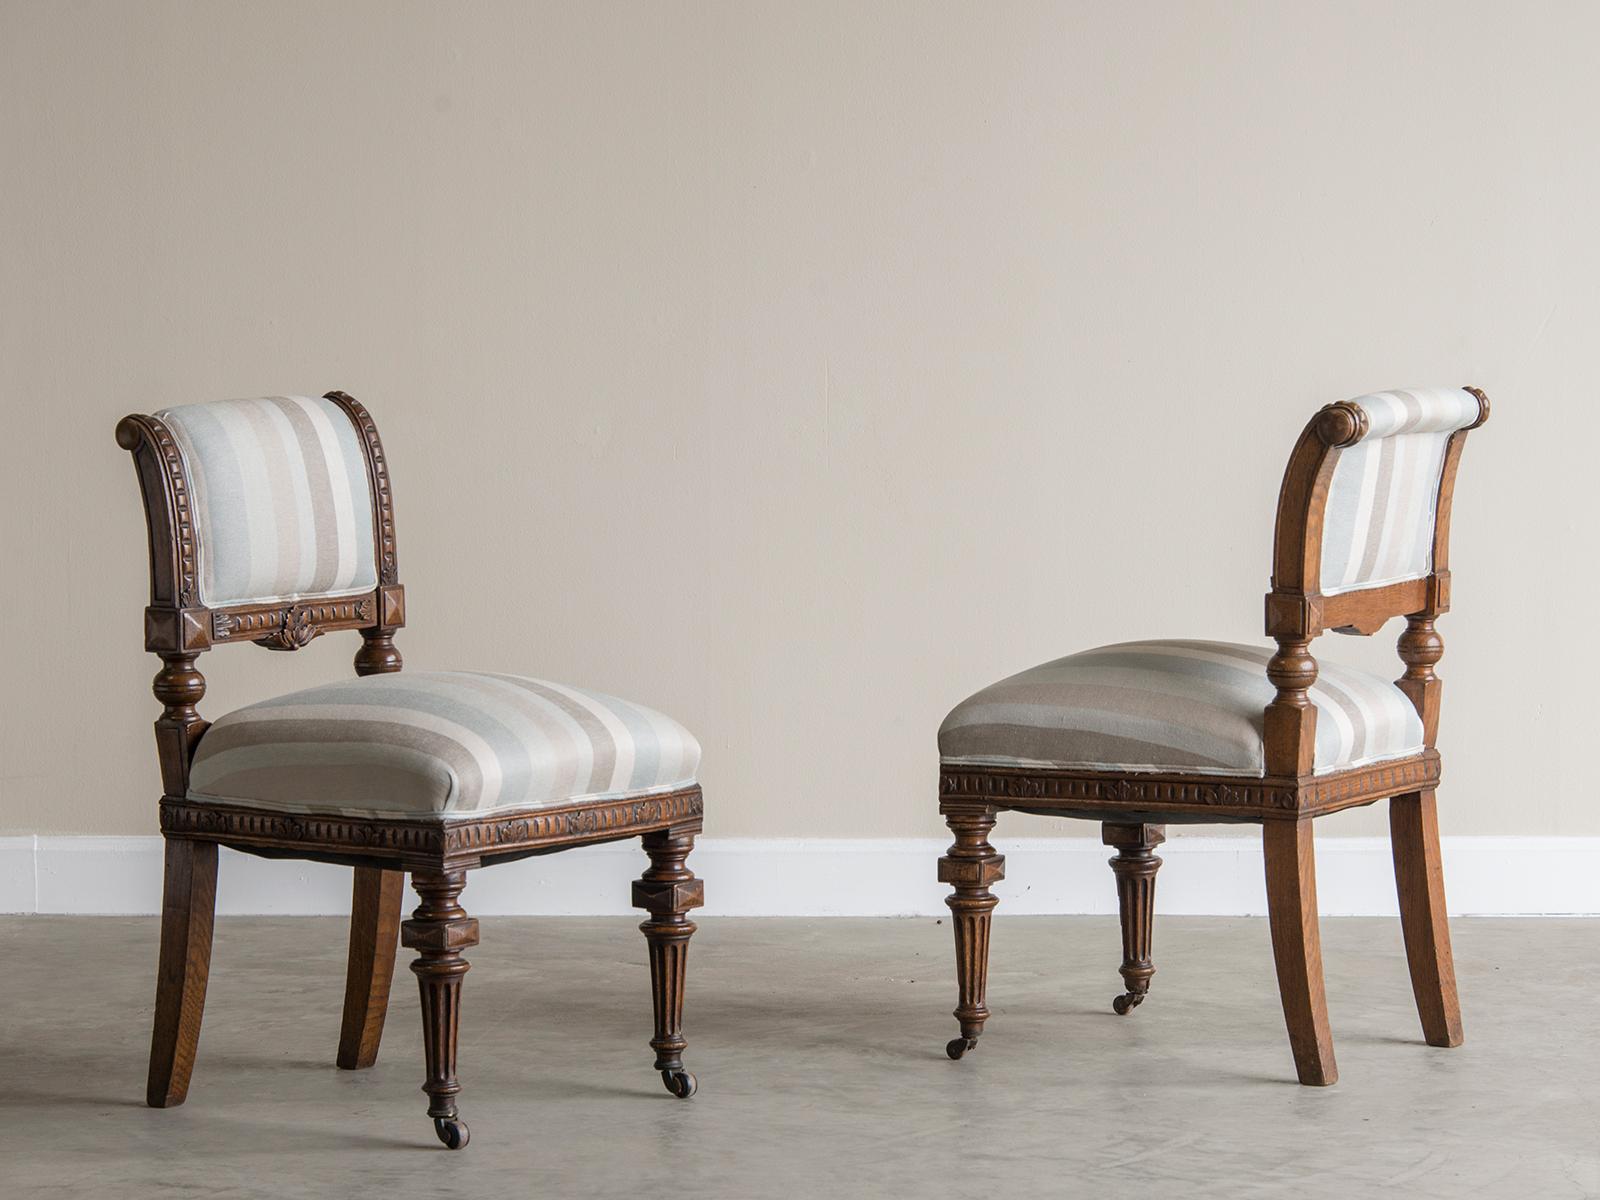 A pair of antique English William IV carved oak chairs circa 1875 with exceptional carving now freshly upholstered in a striped linen. Please notice that the front legs have wonderfully robust turned profiles and retain the original brass casters so